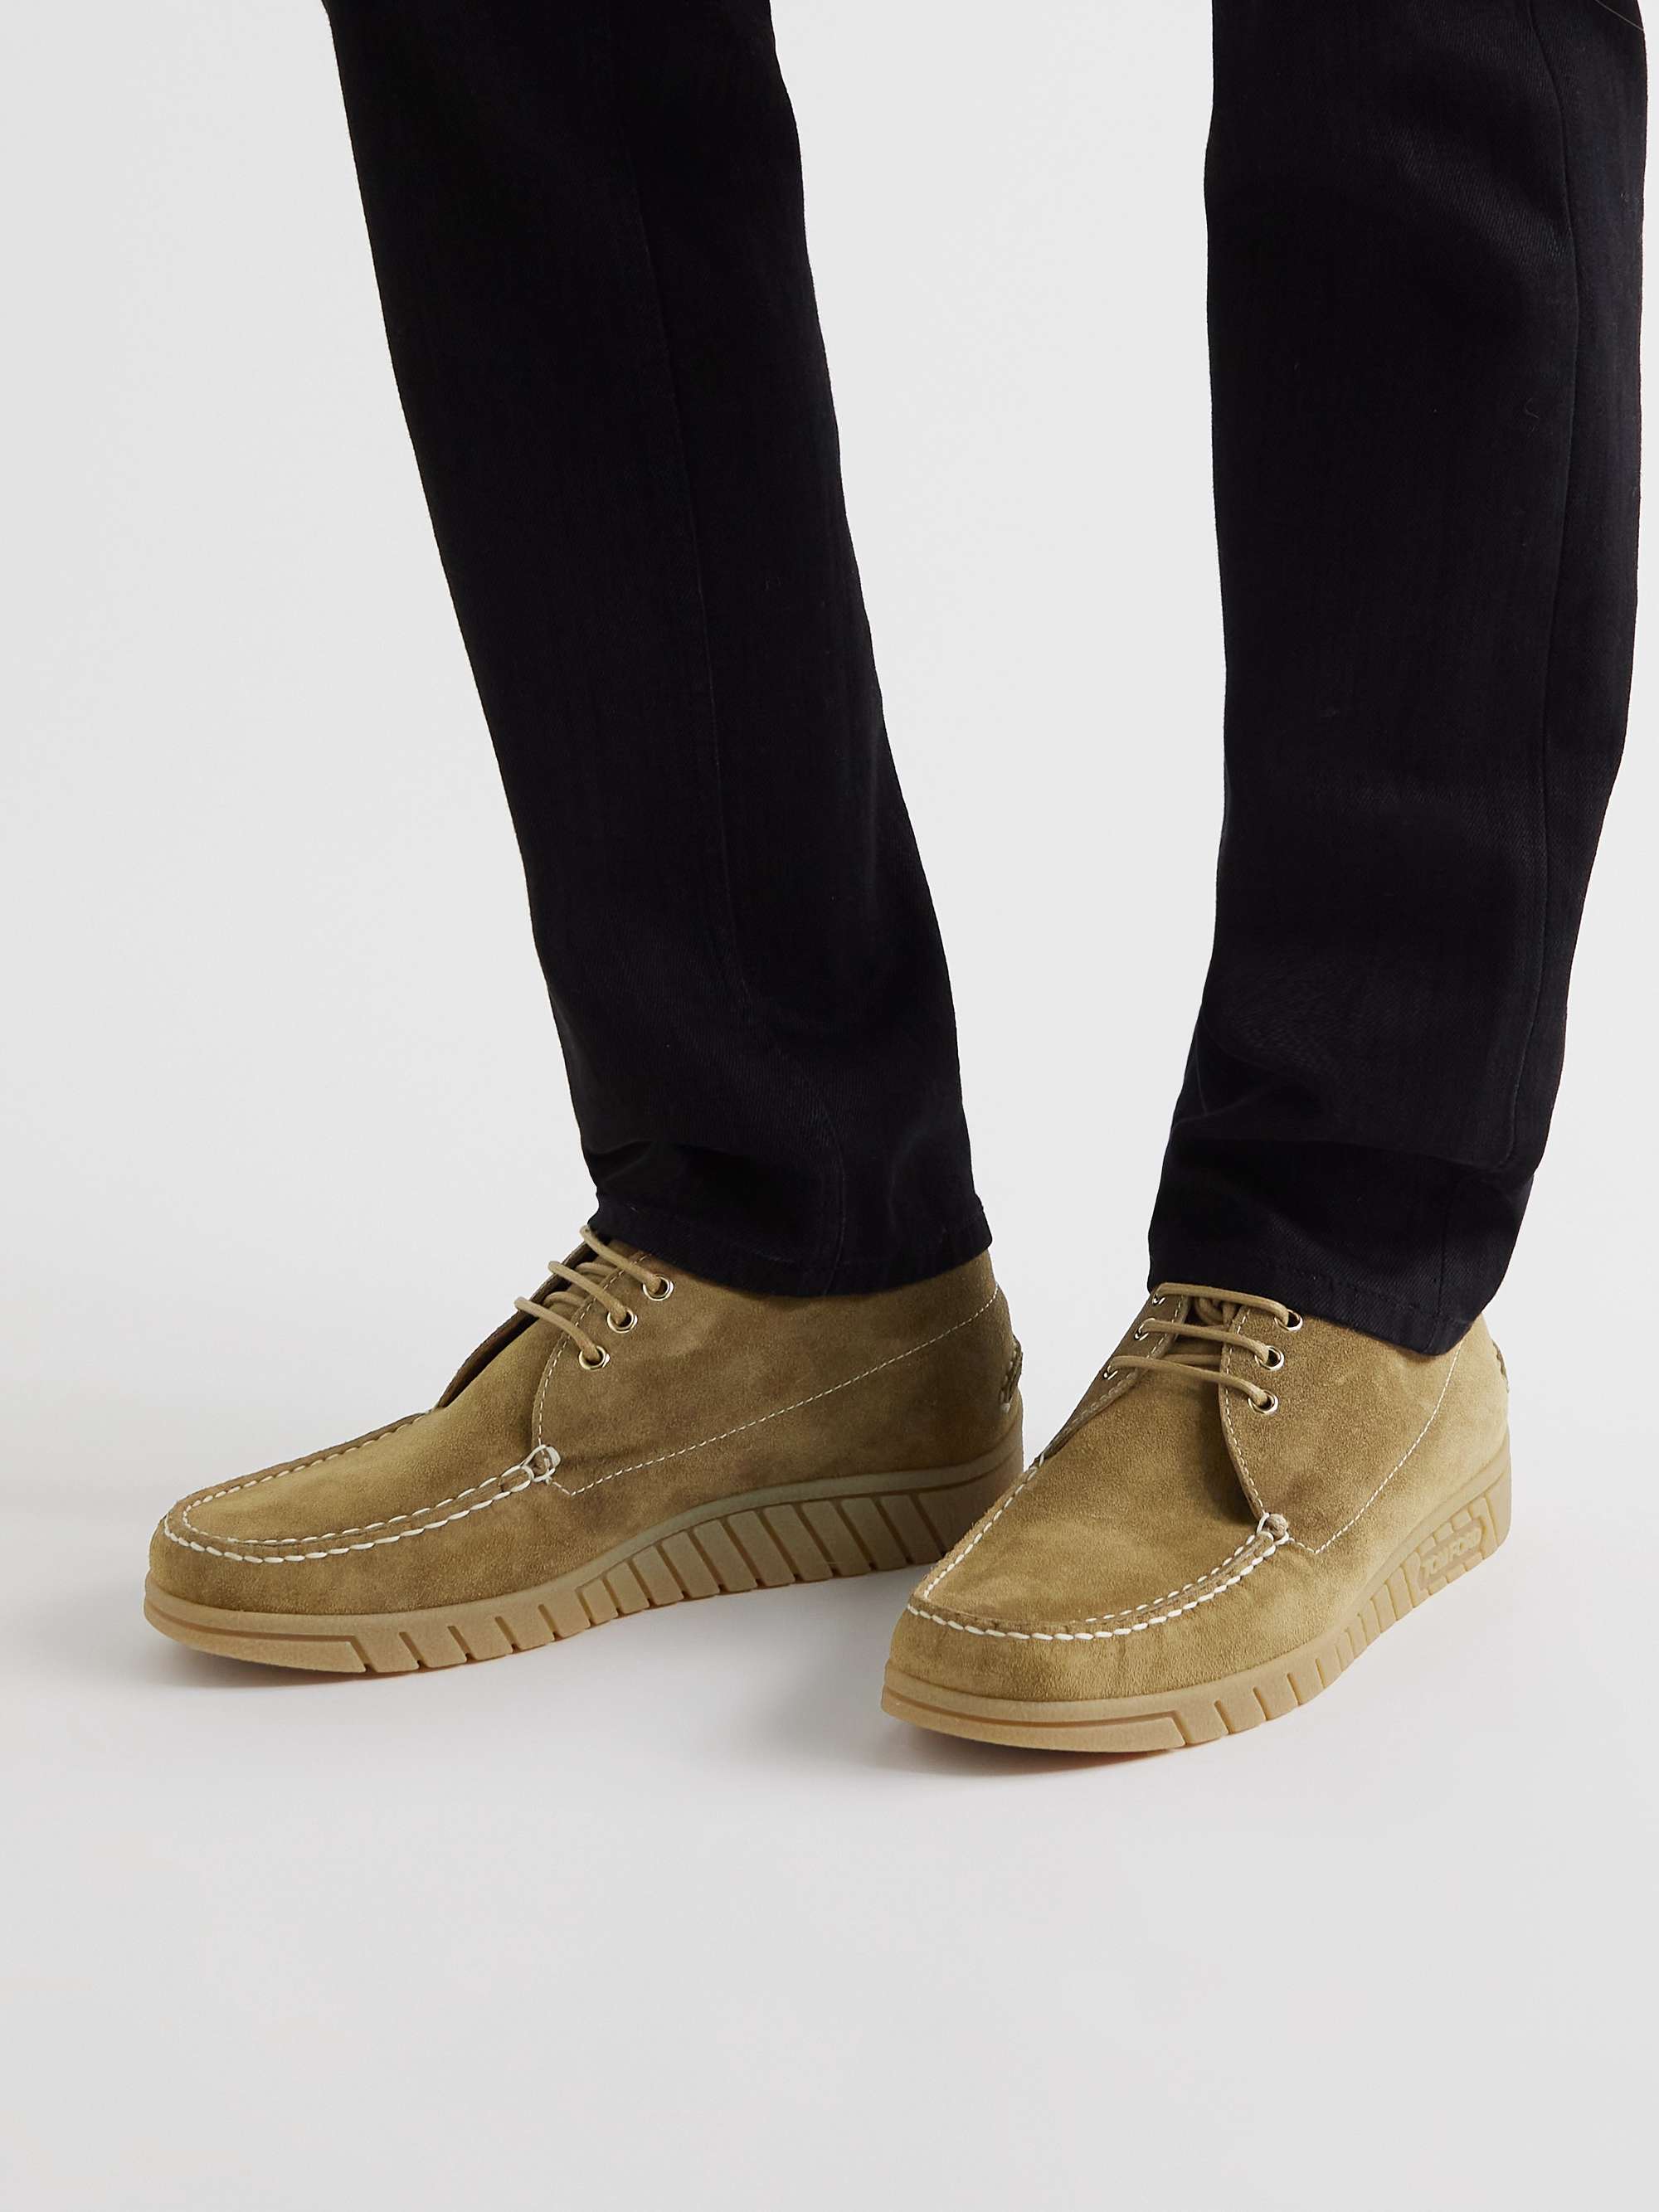 TOM FORD Connar Suede Chukka Boots